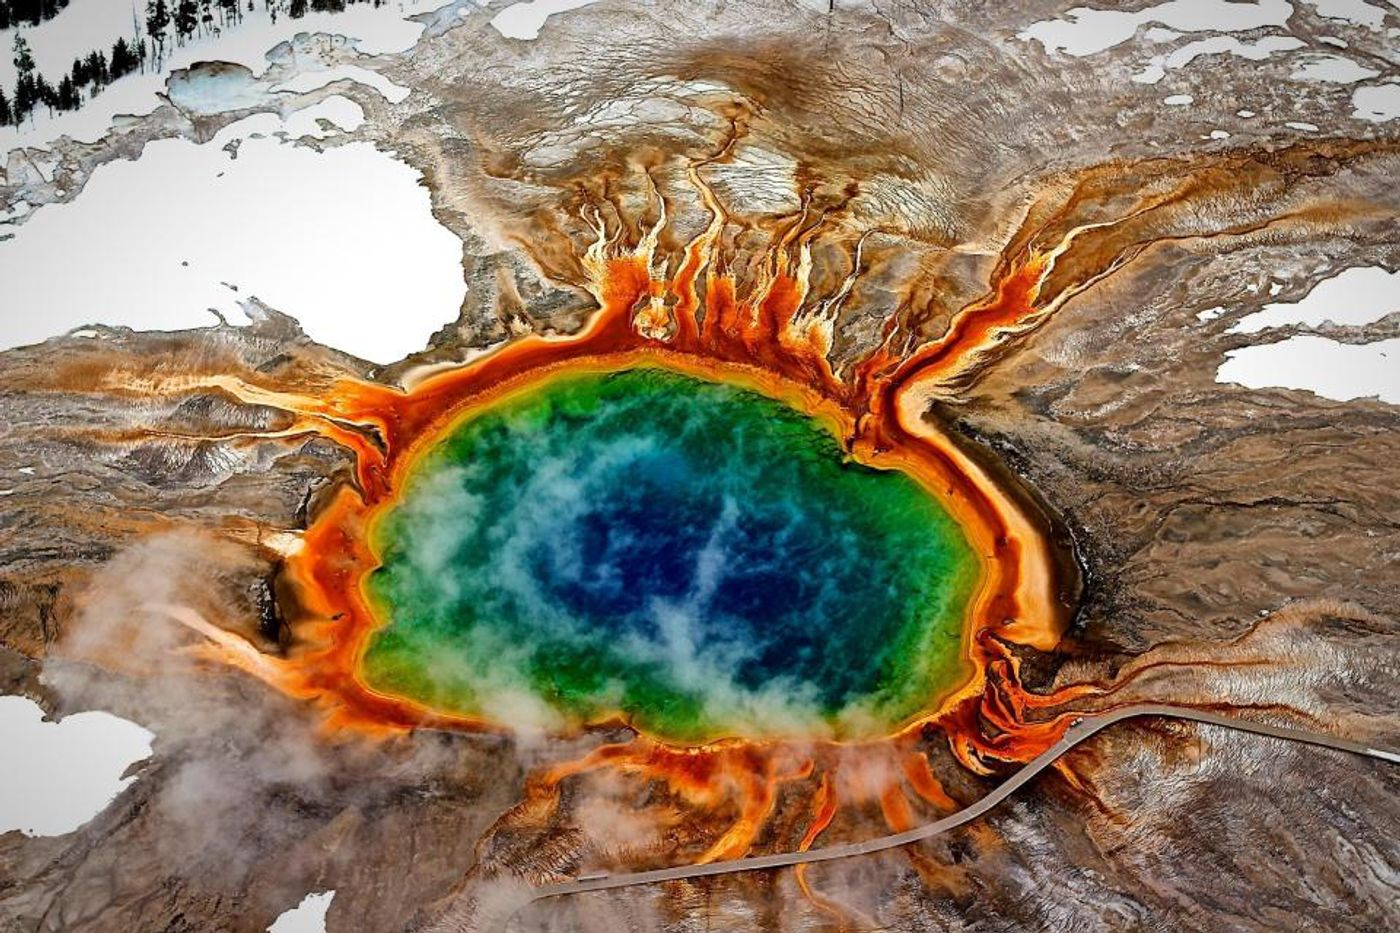 Though it is certainly a sight to see, if this supervolcano erupts you won't want to be too close. Photo: The Sun